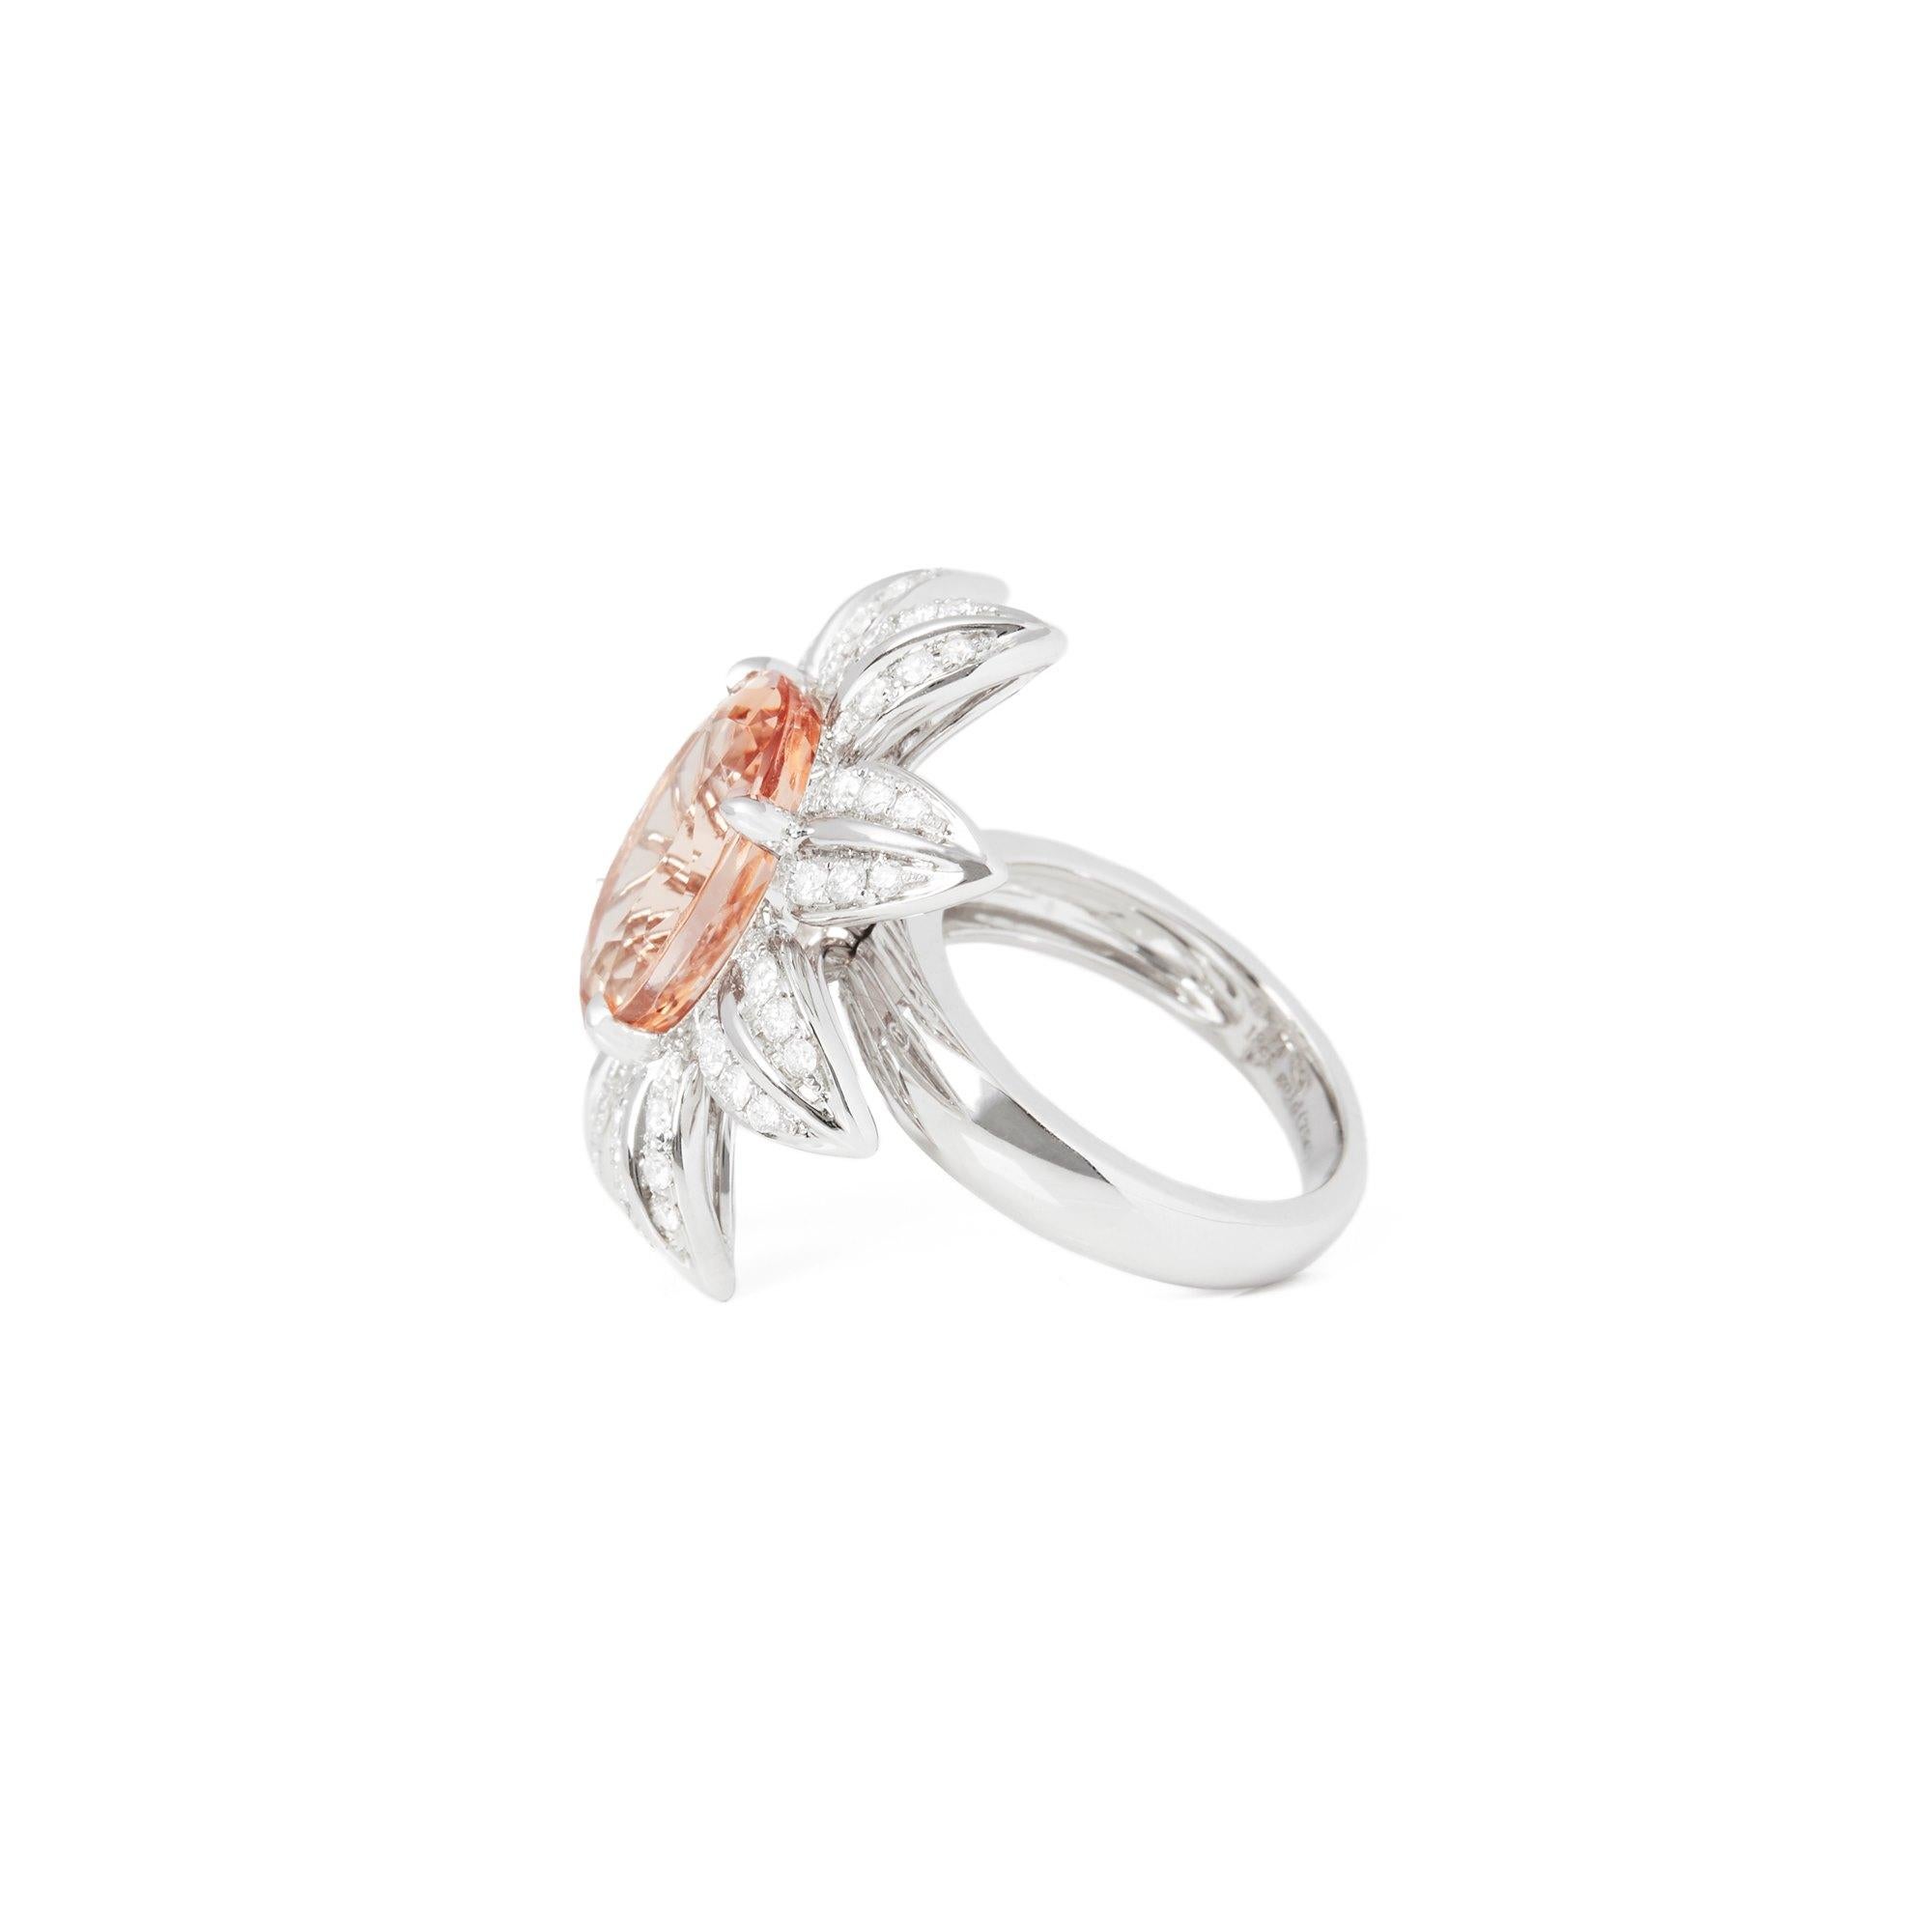 Certified 8.86ct Oval Cut Morganite and Diamond 18ct Gold Ring In New Condition For Sale In Bishop's Stortford, Hertfordshire